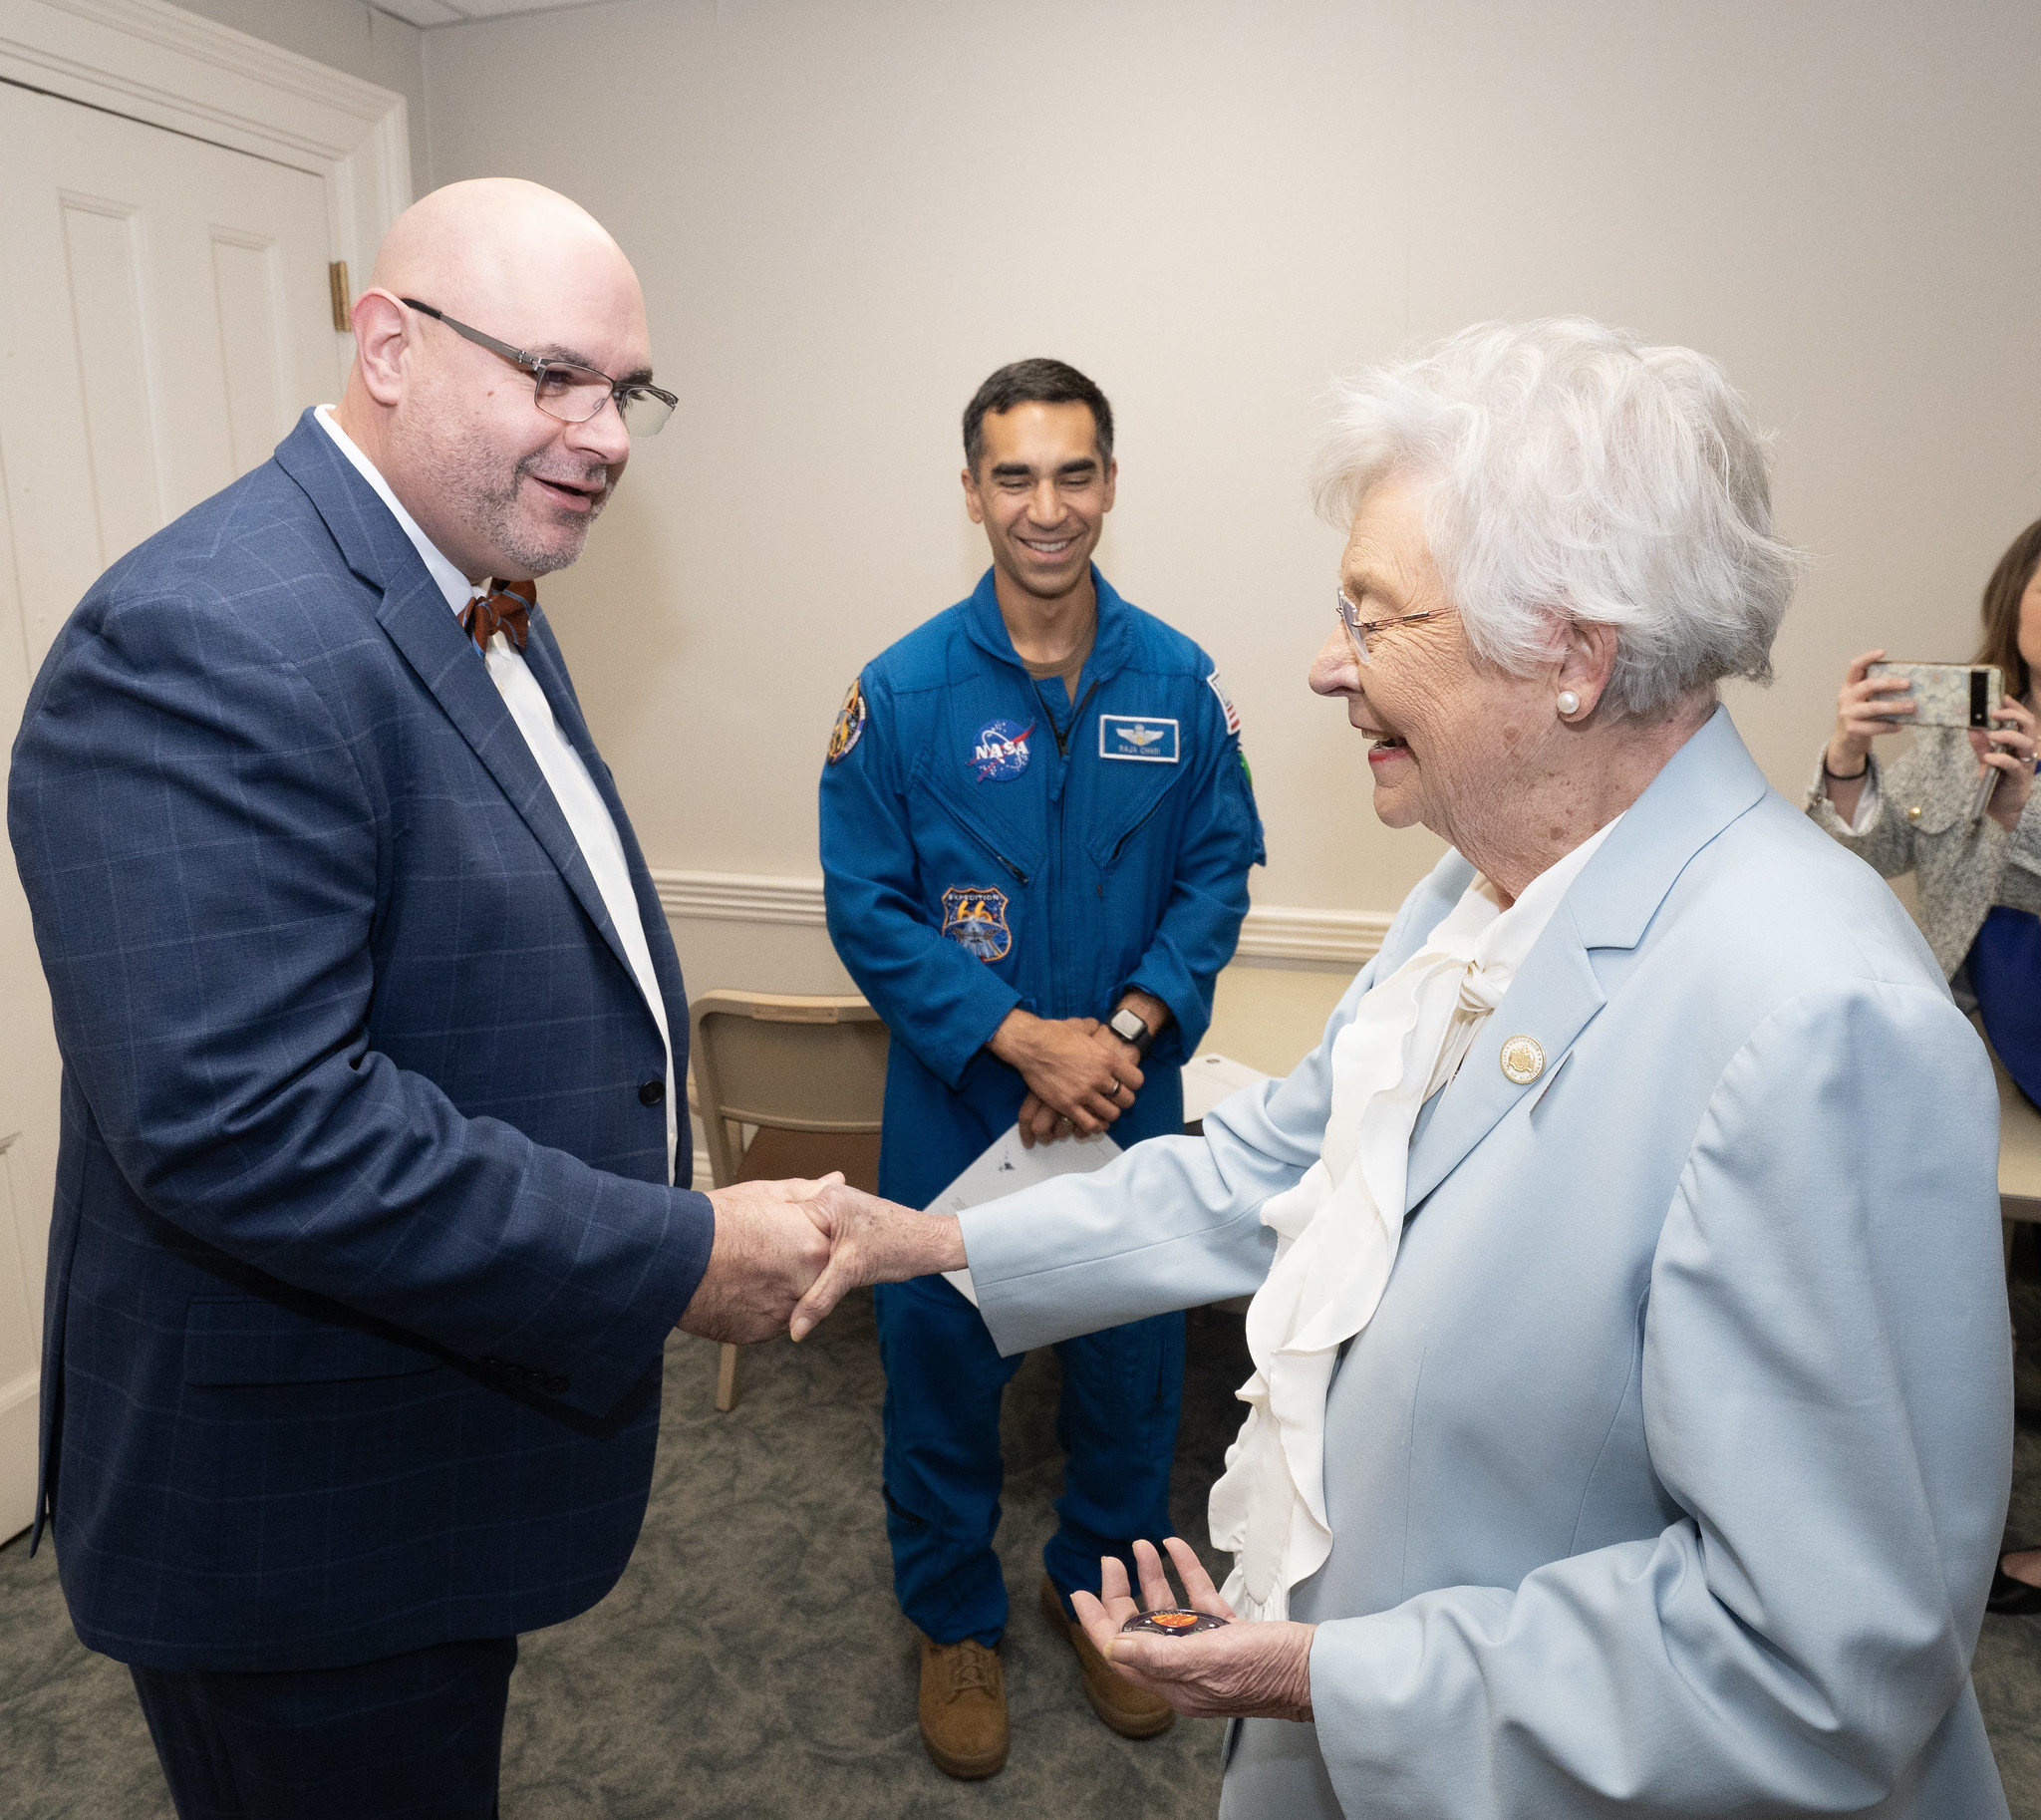 Alabama Gov. Kay Ivey, right, greets Pelfrey during Alabama Space Day as NASA astronaut Raja Chari, center, looks on. The governor issued a proclamation declaring the state holiday in honor of the aerospace industry's impact on Alabama.